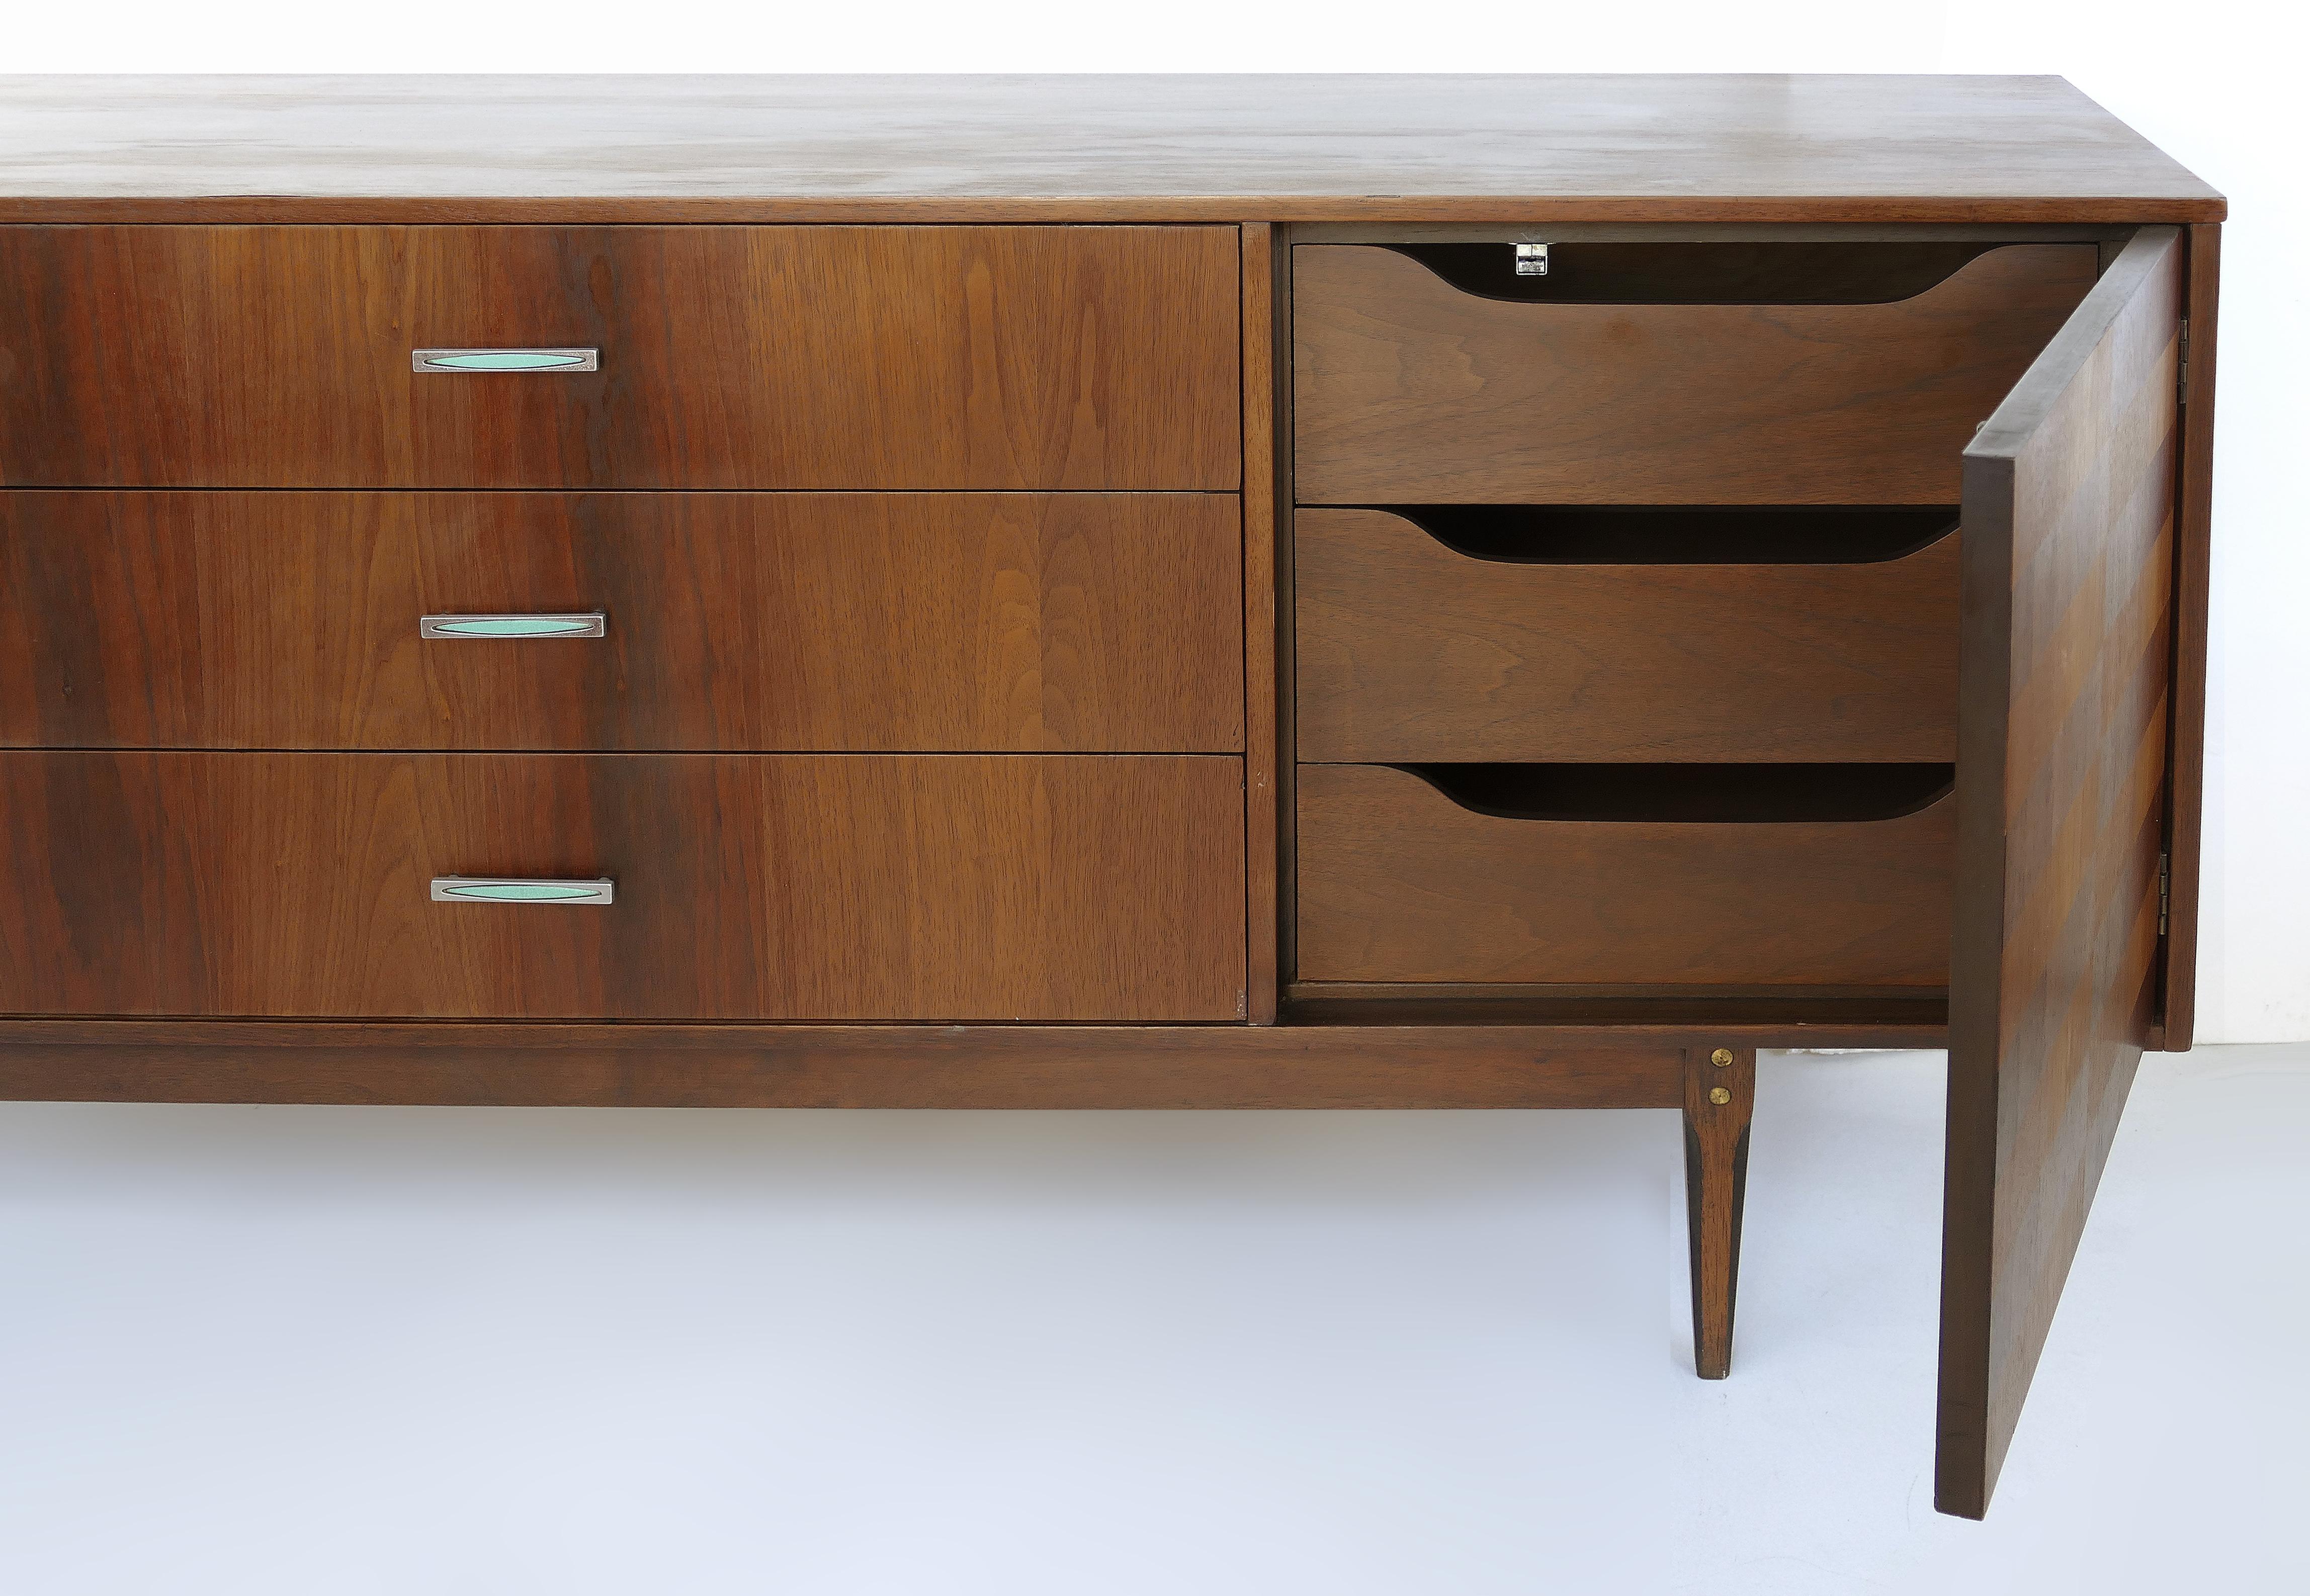 North American Kroehler Custom Crafted Credenza w/ Rosewood Inlays and Enameled Brass Hardware